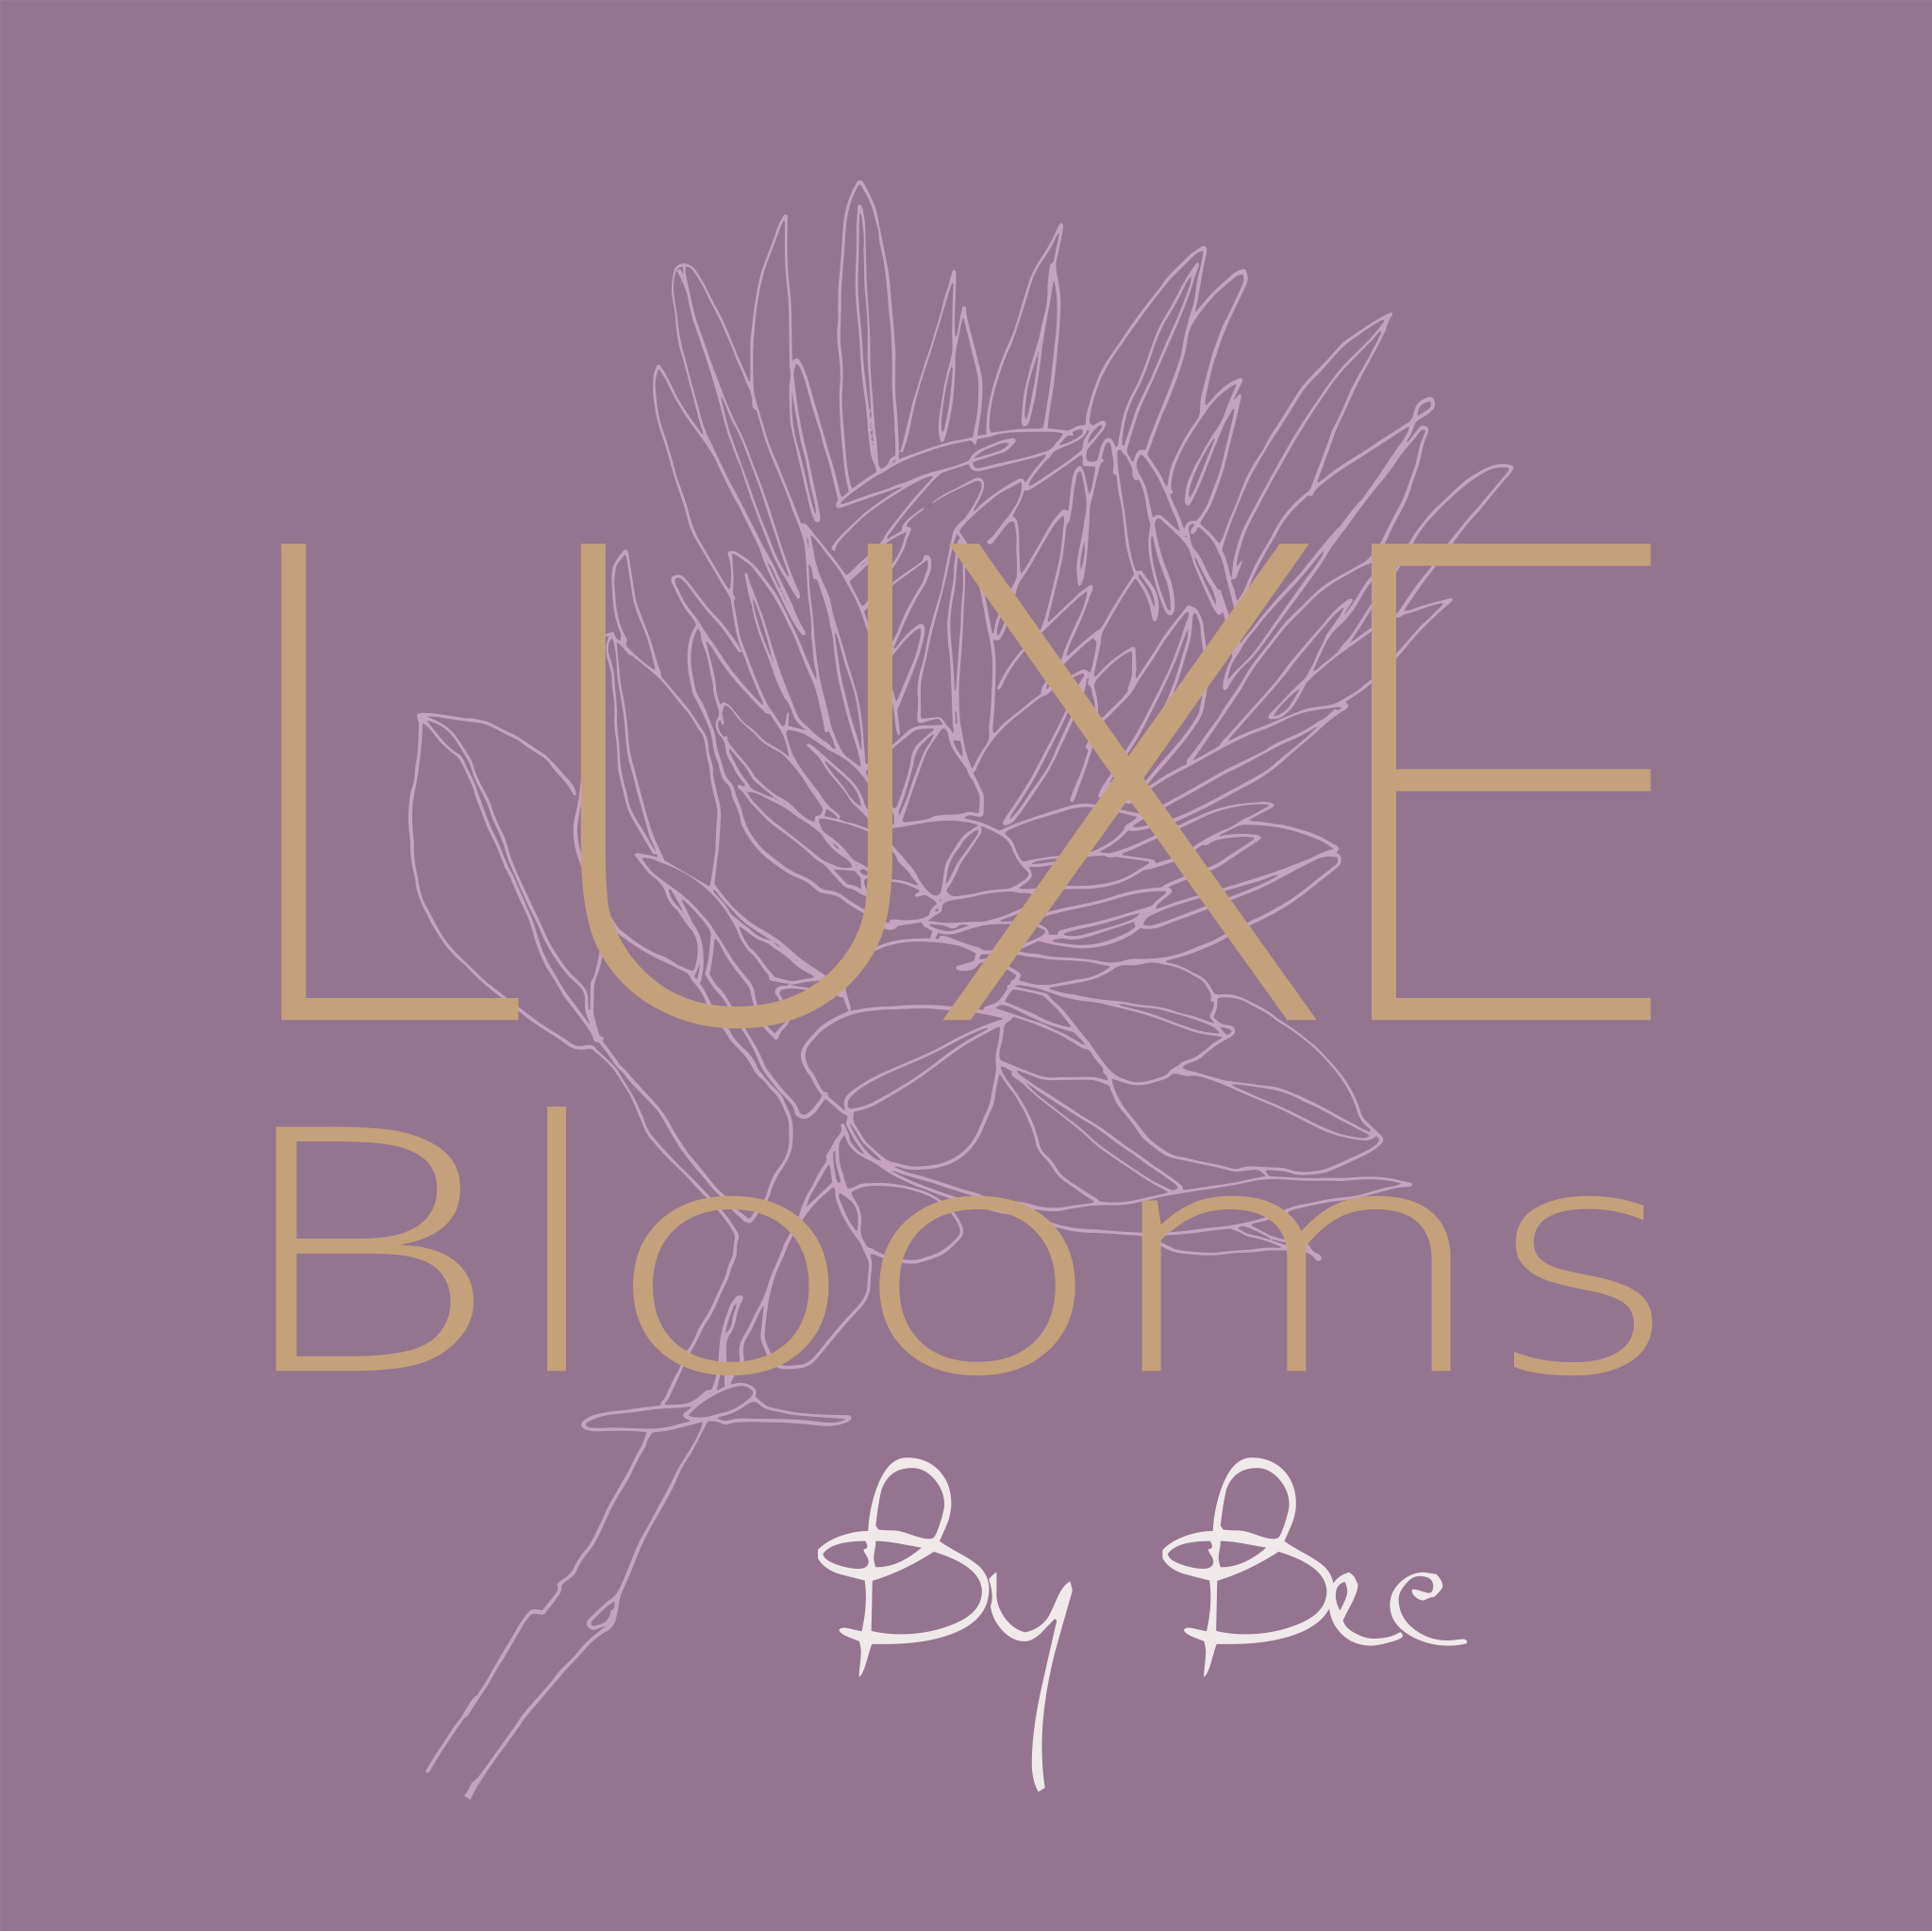 Luxe Blooms by Bec logo